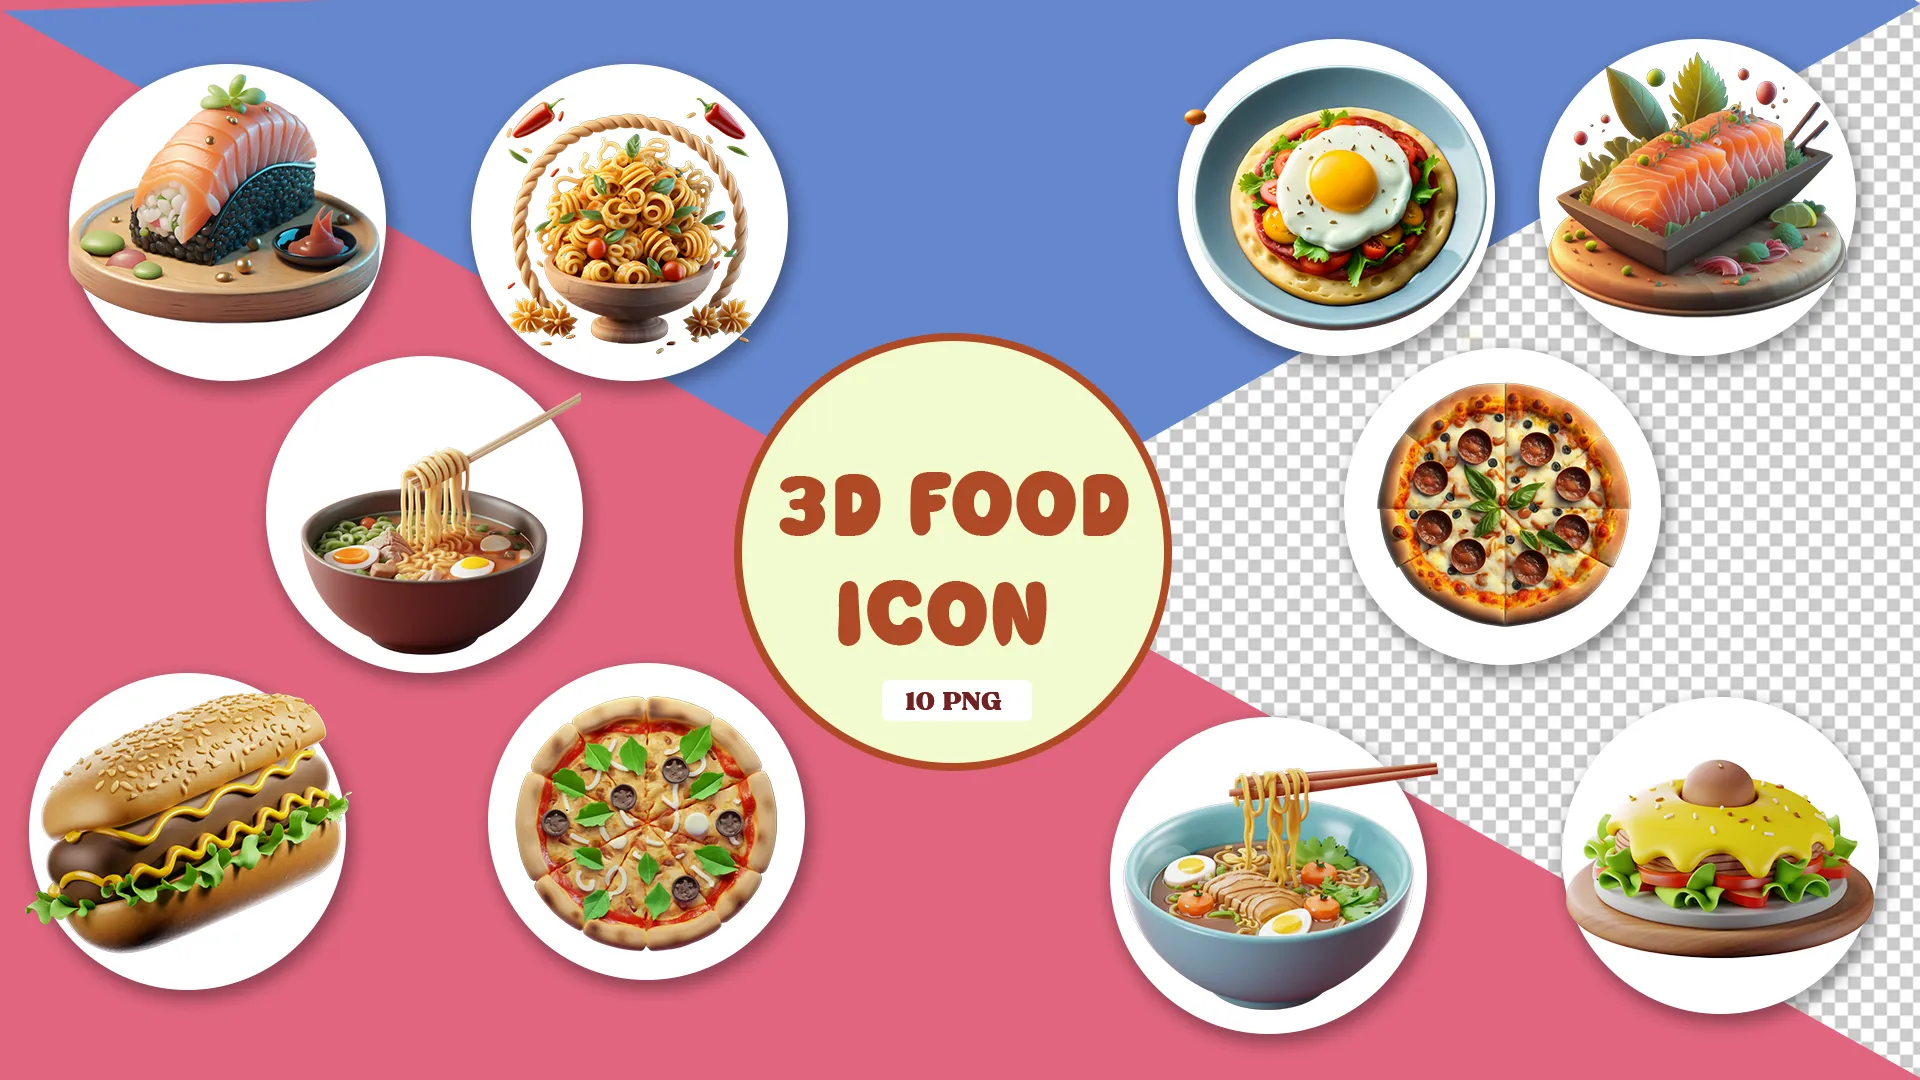 Global Cuisine 3D Food Icons Pack